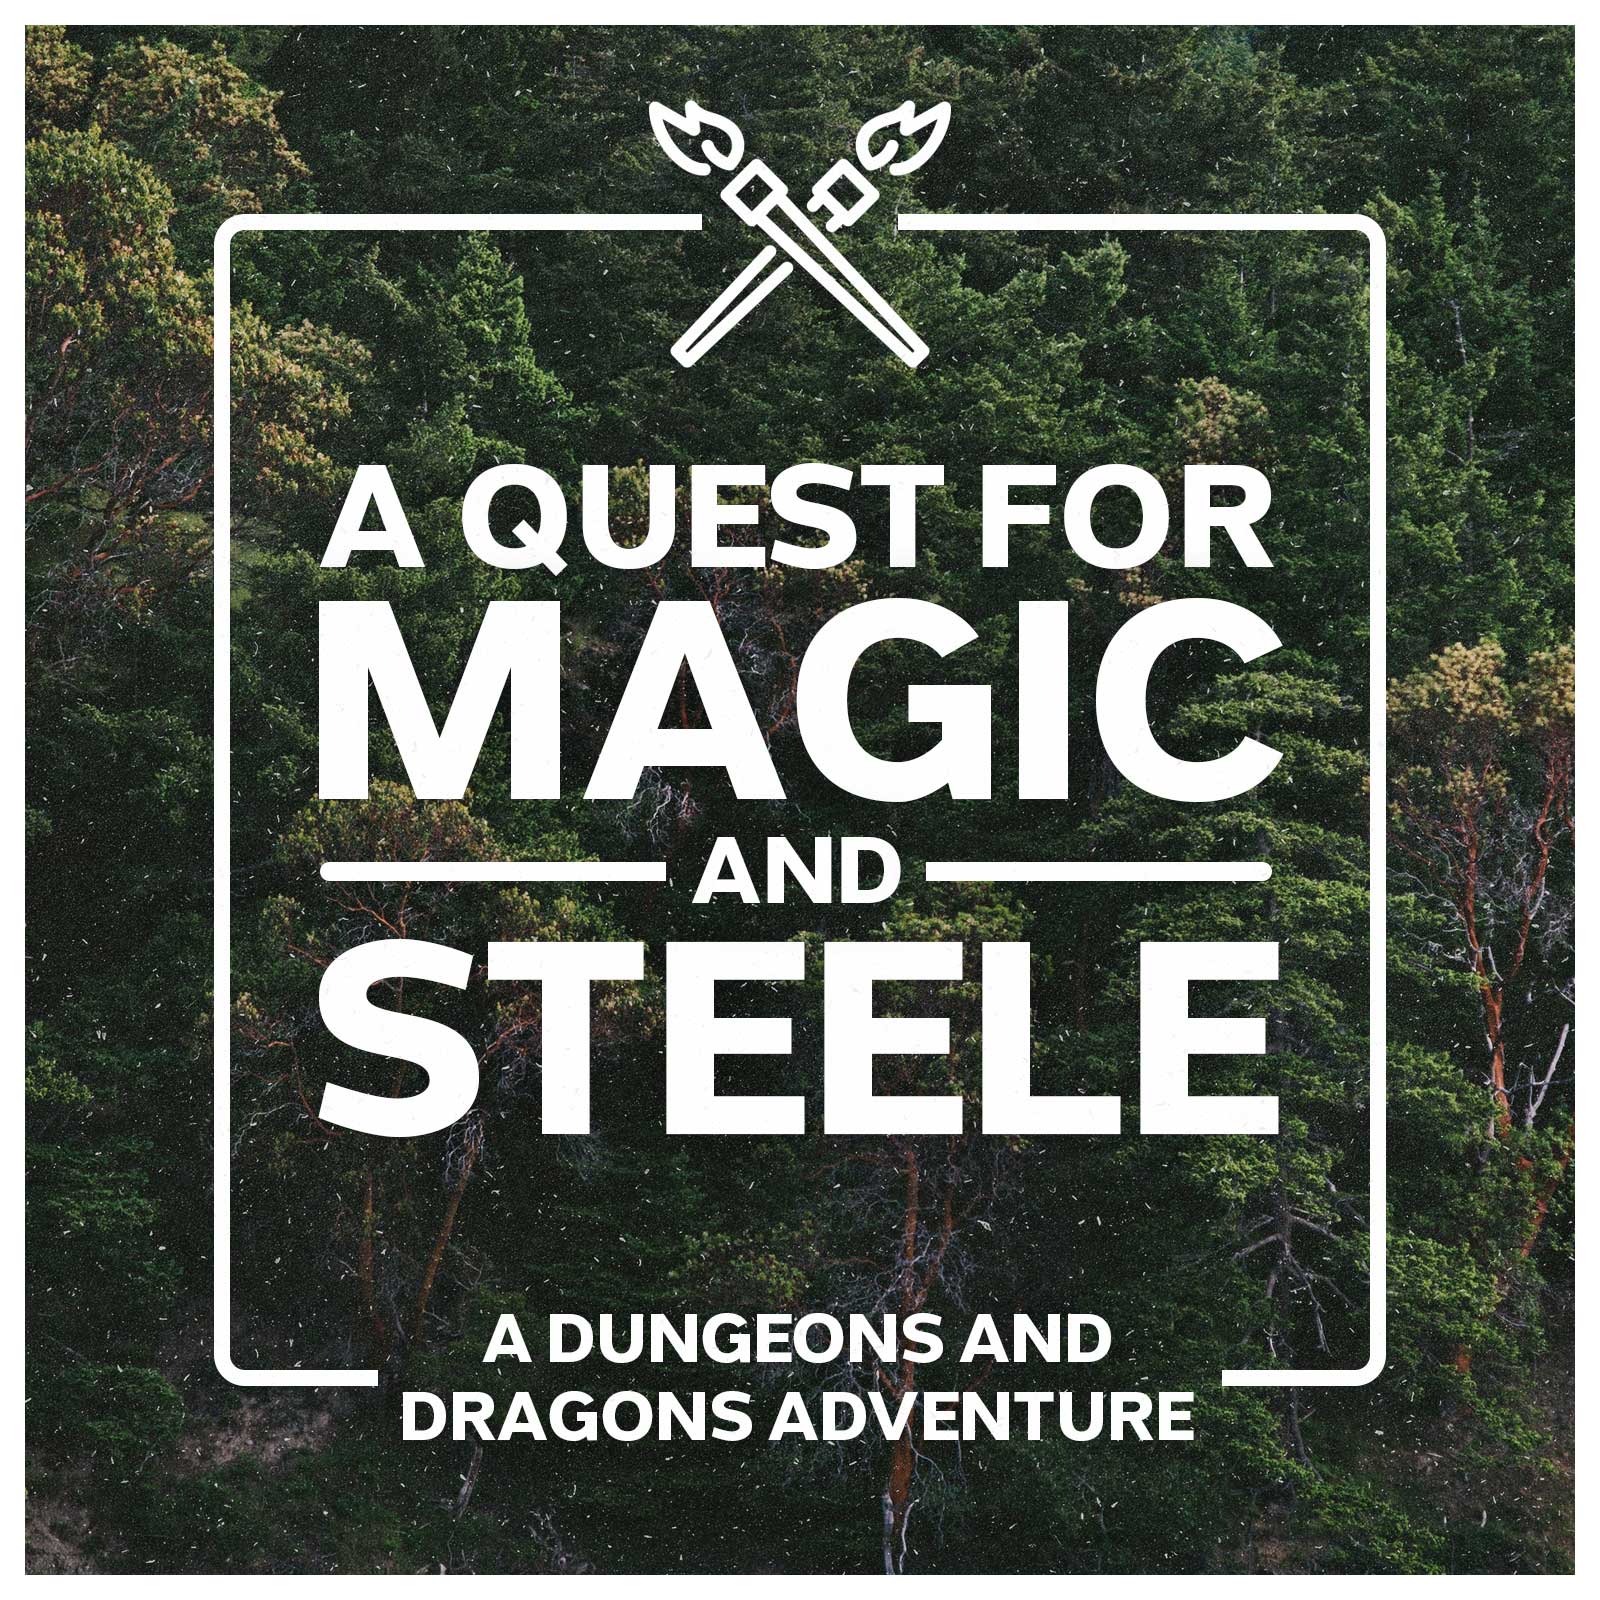 Magic and Steele - RPG Casts | RPG Podcasts | Tabletop RPG Podcasts